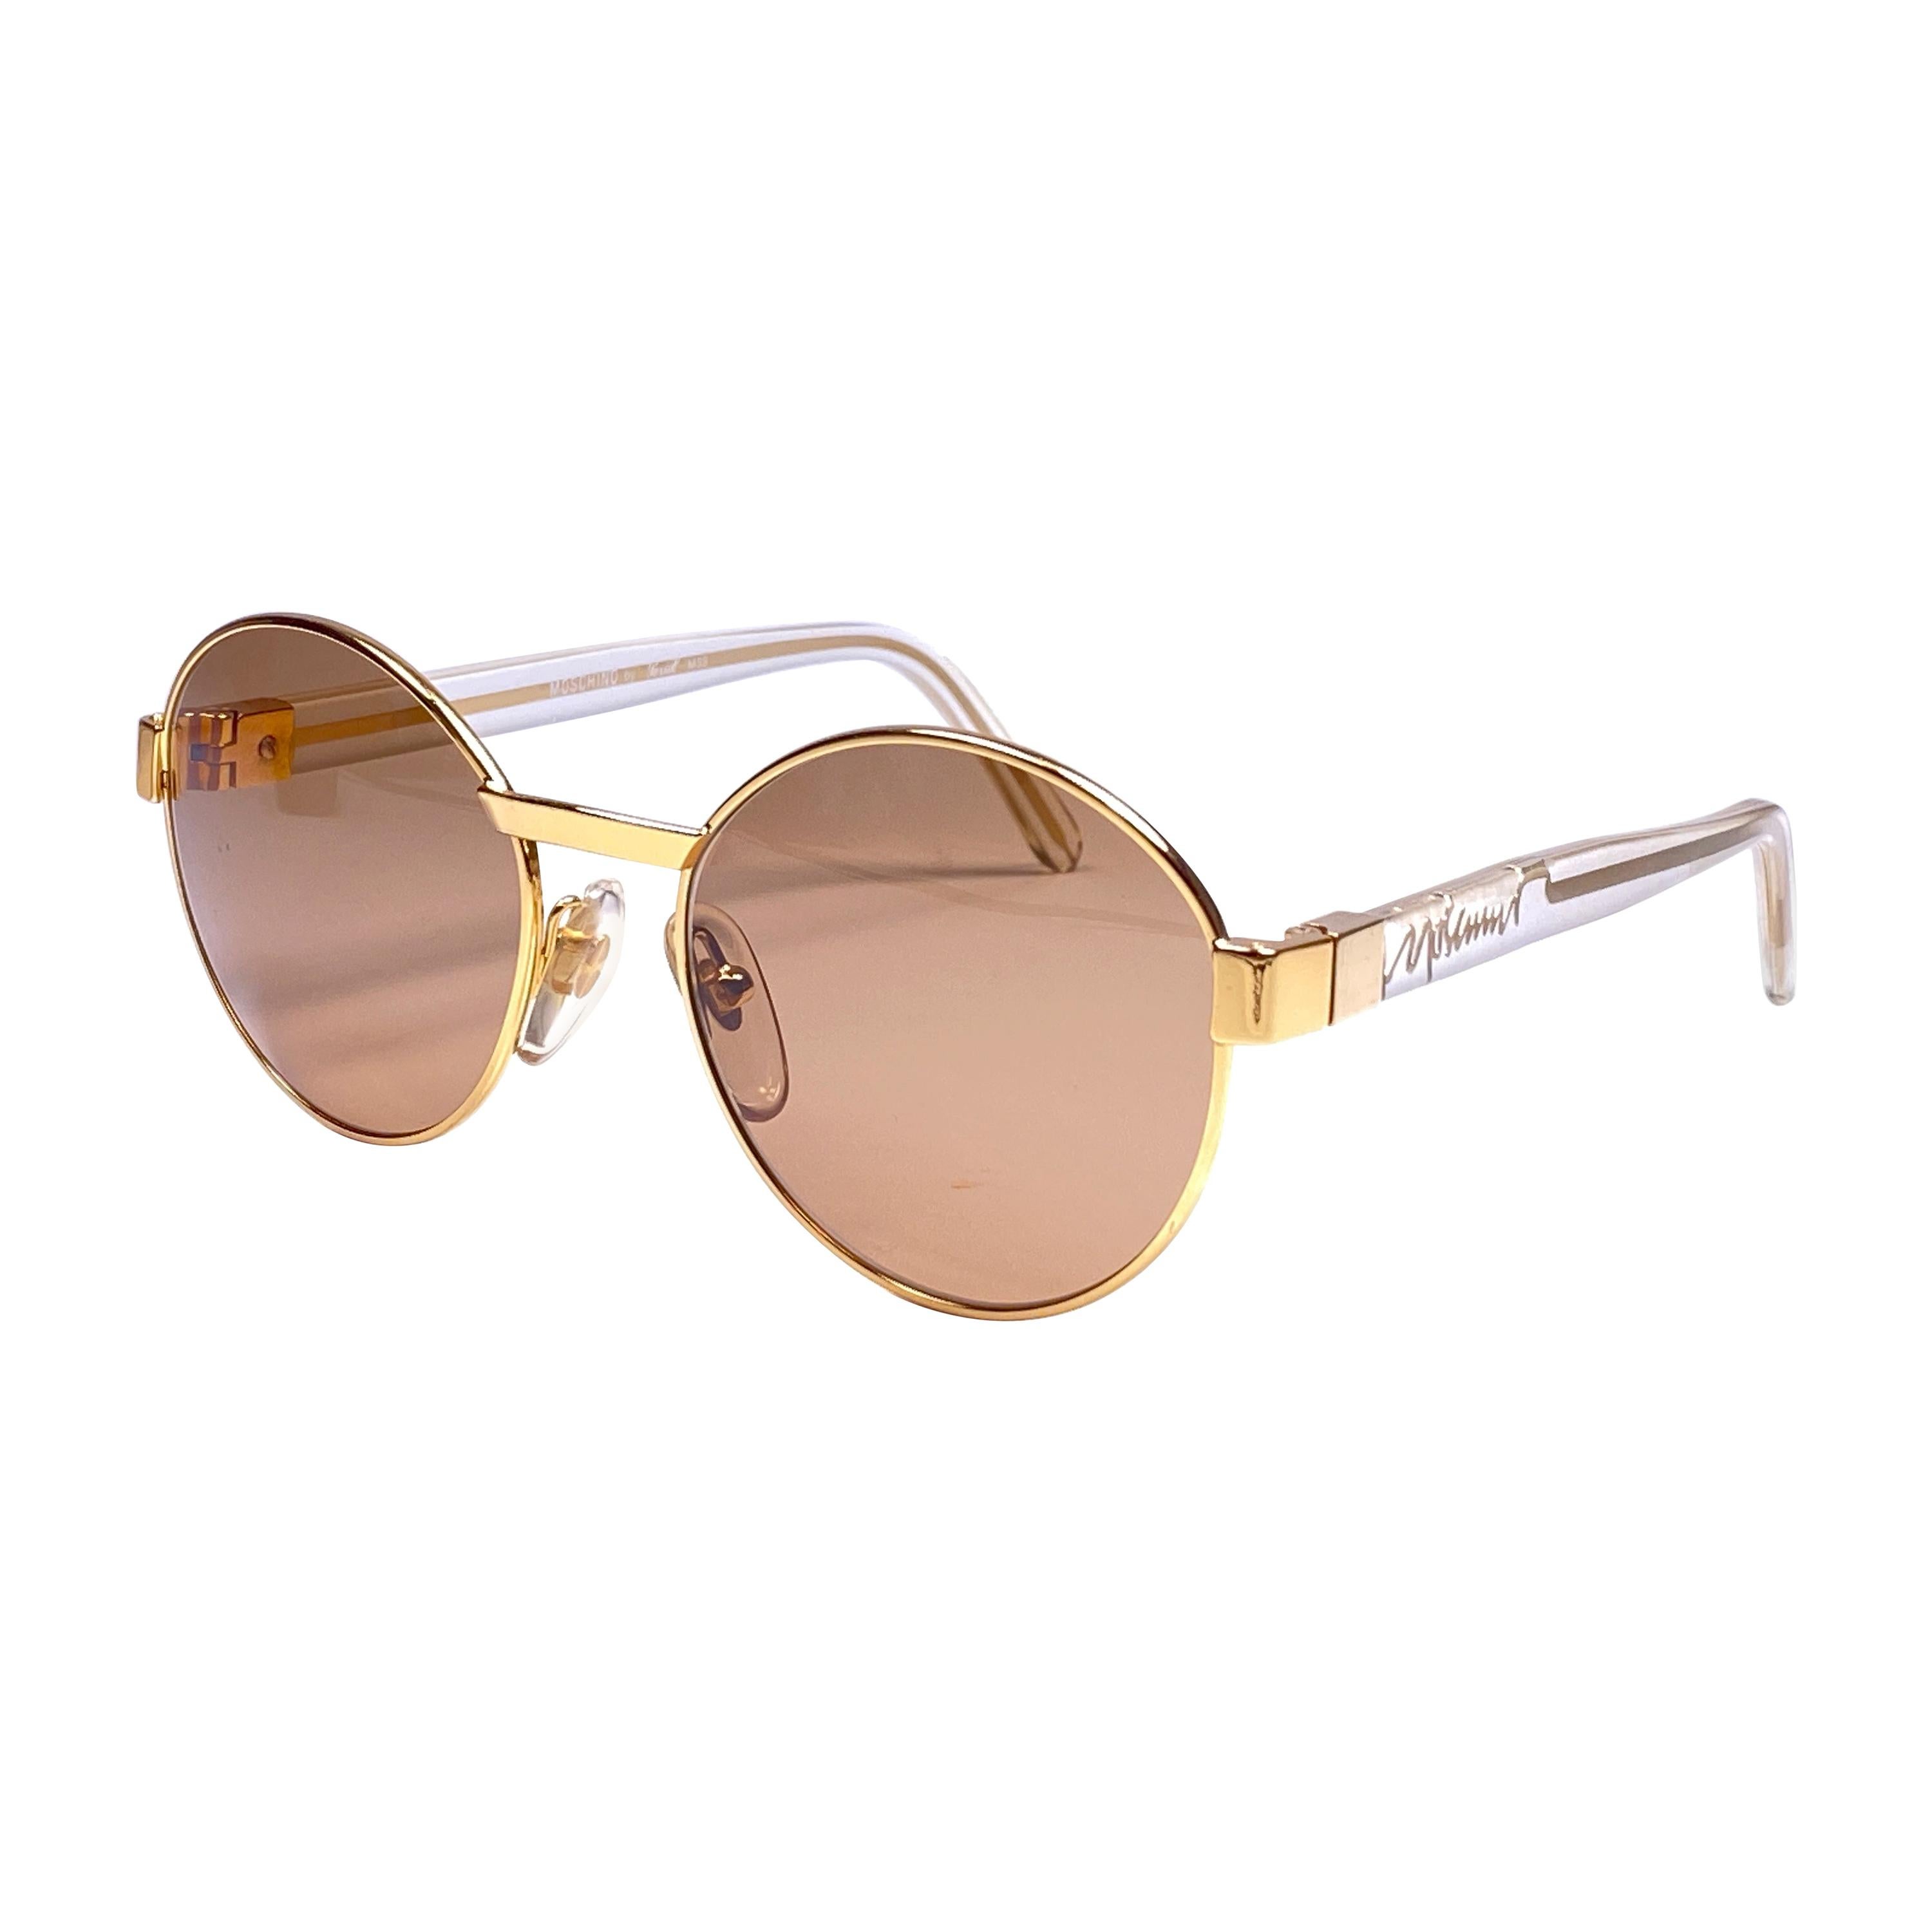 New Vintage Moschino By Persol M33 Frame Medium Round Gold Sunglasses 